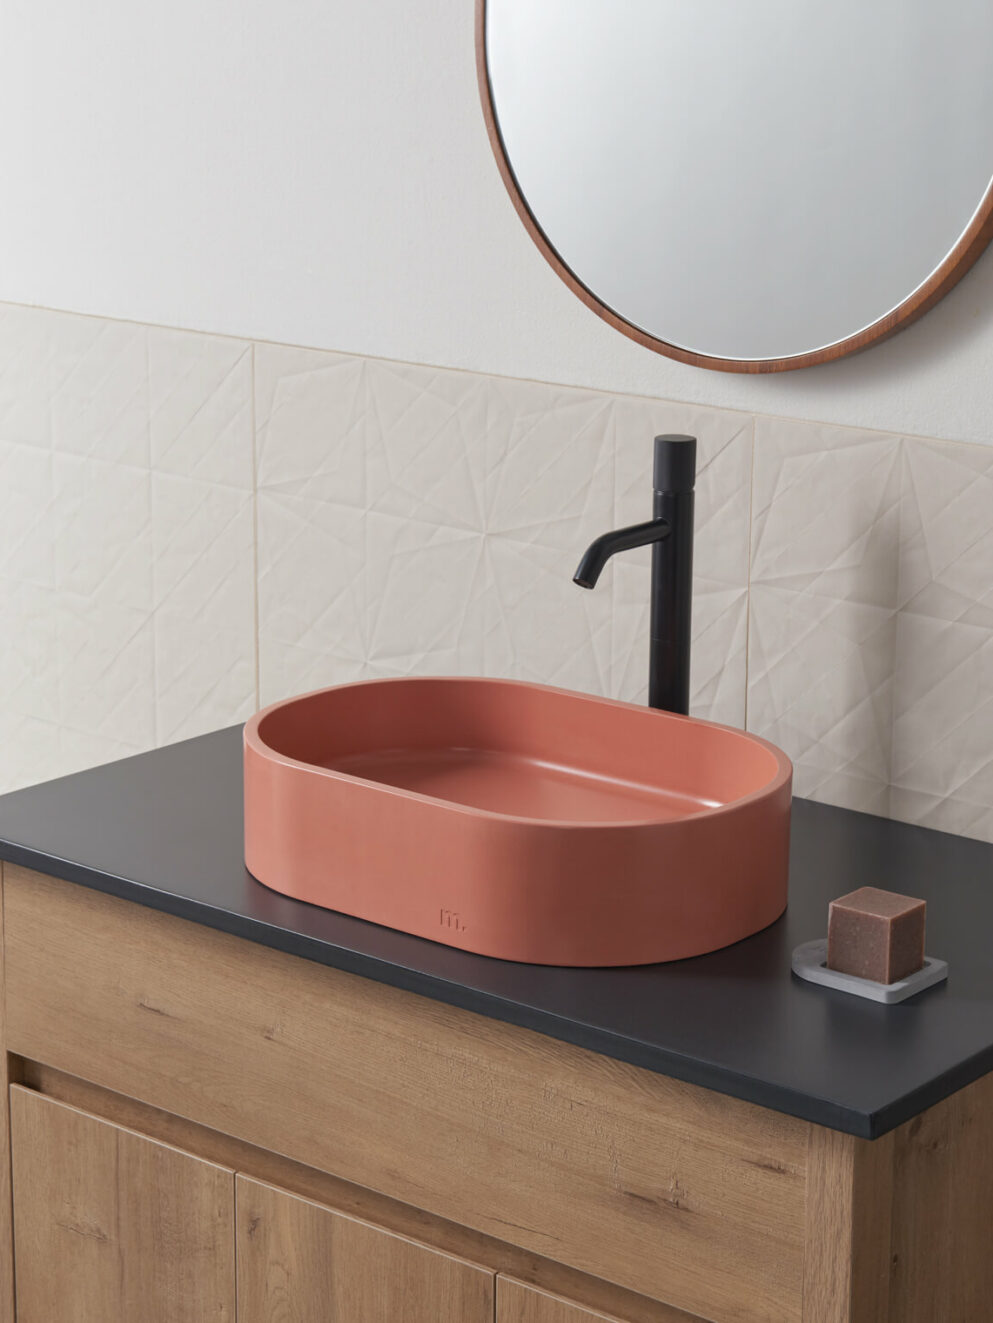 the Parro(pill shaped) sink in mousse set in a calming modern bathroom setting with a black faucet and wooden cabinet